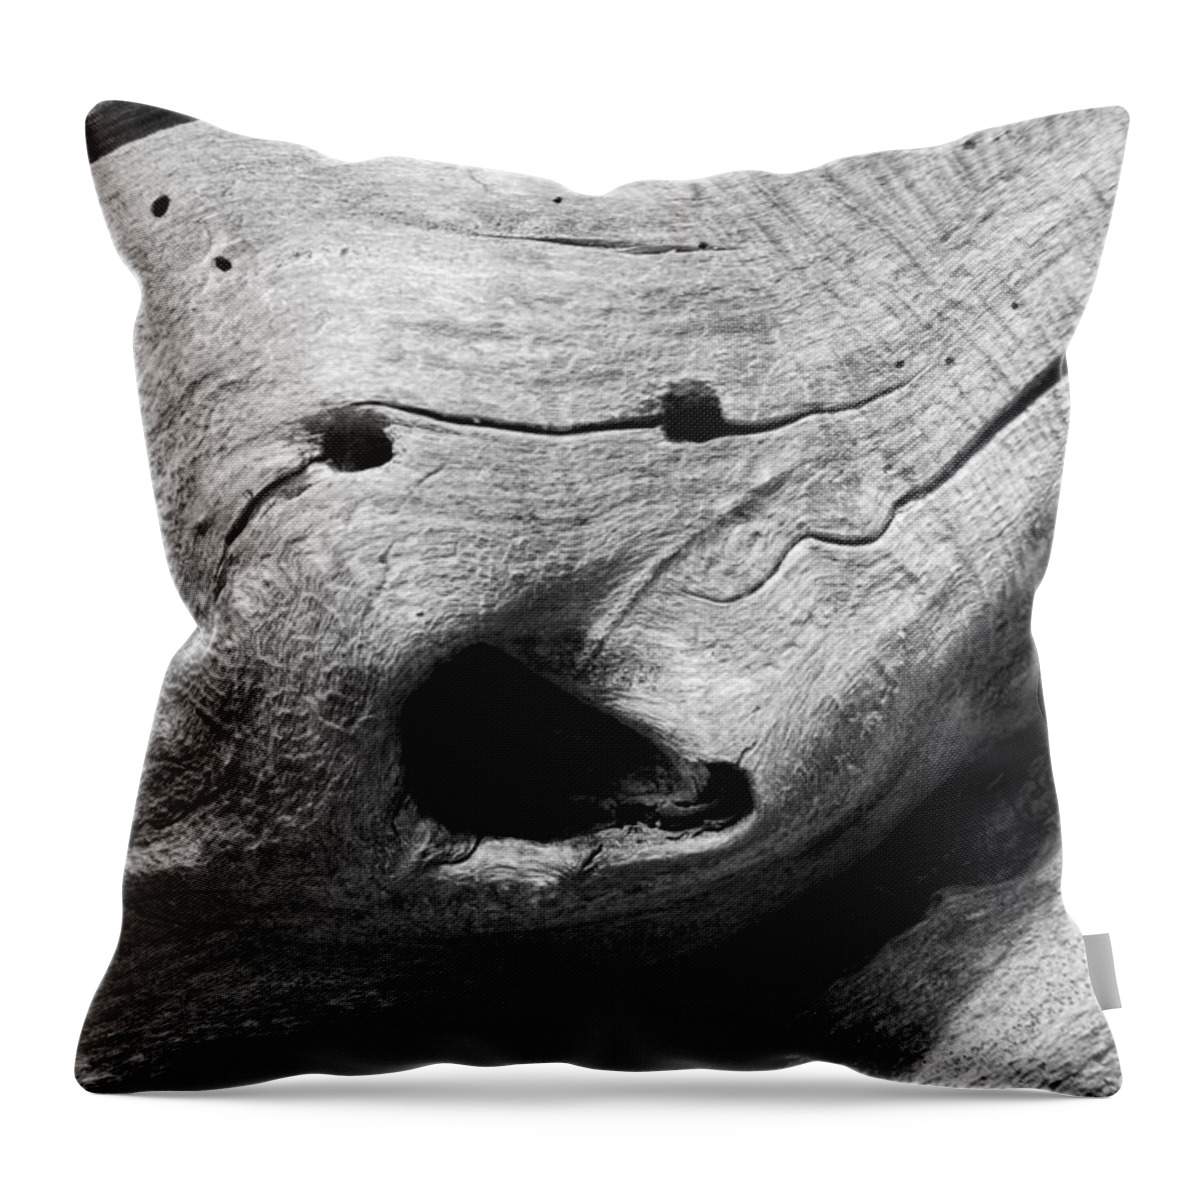 Wood Throw Pillow featuring the photograph Broken Smiles by Donna Blackhall